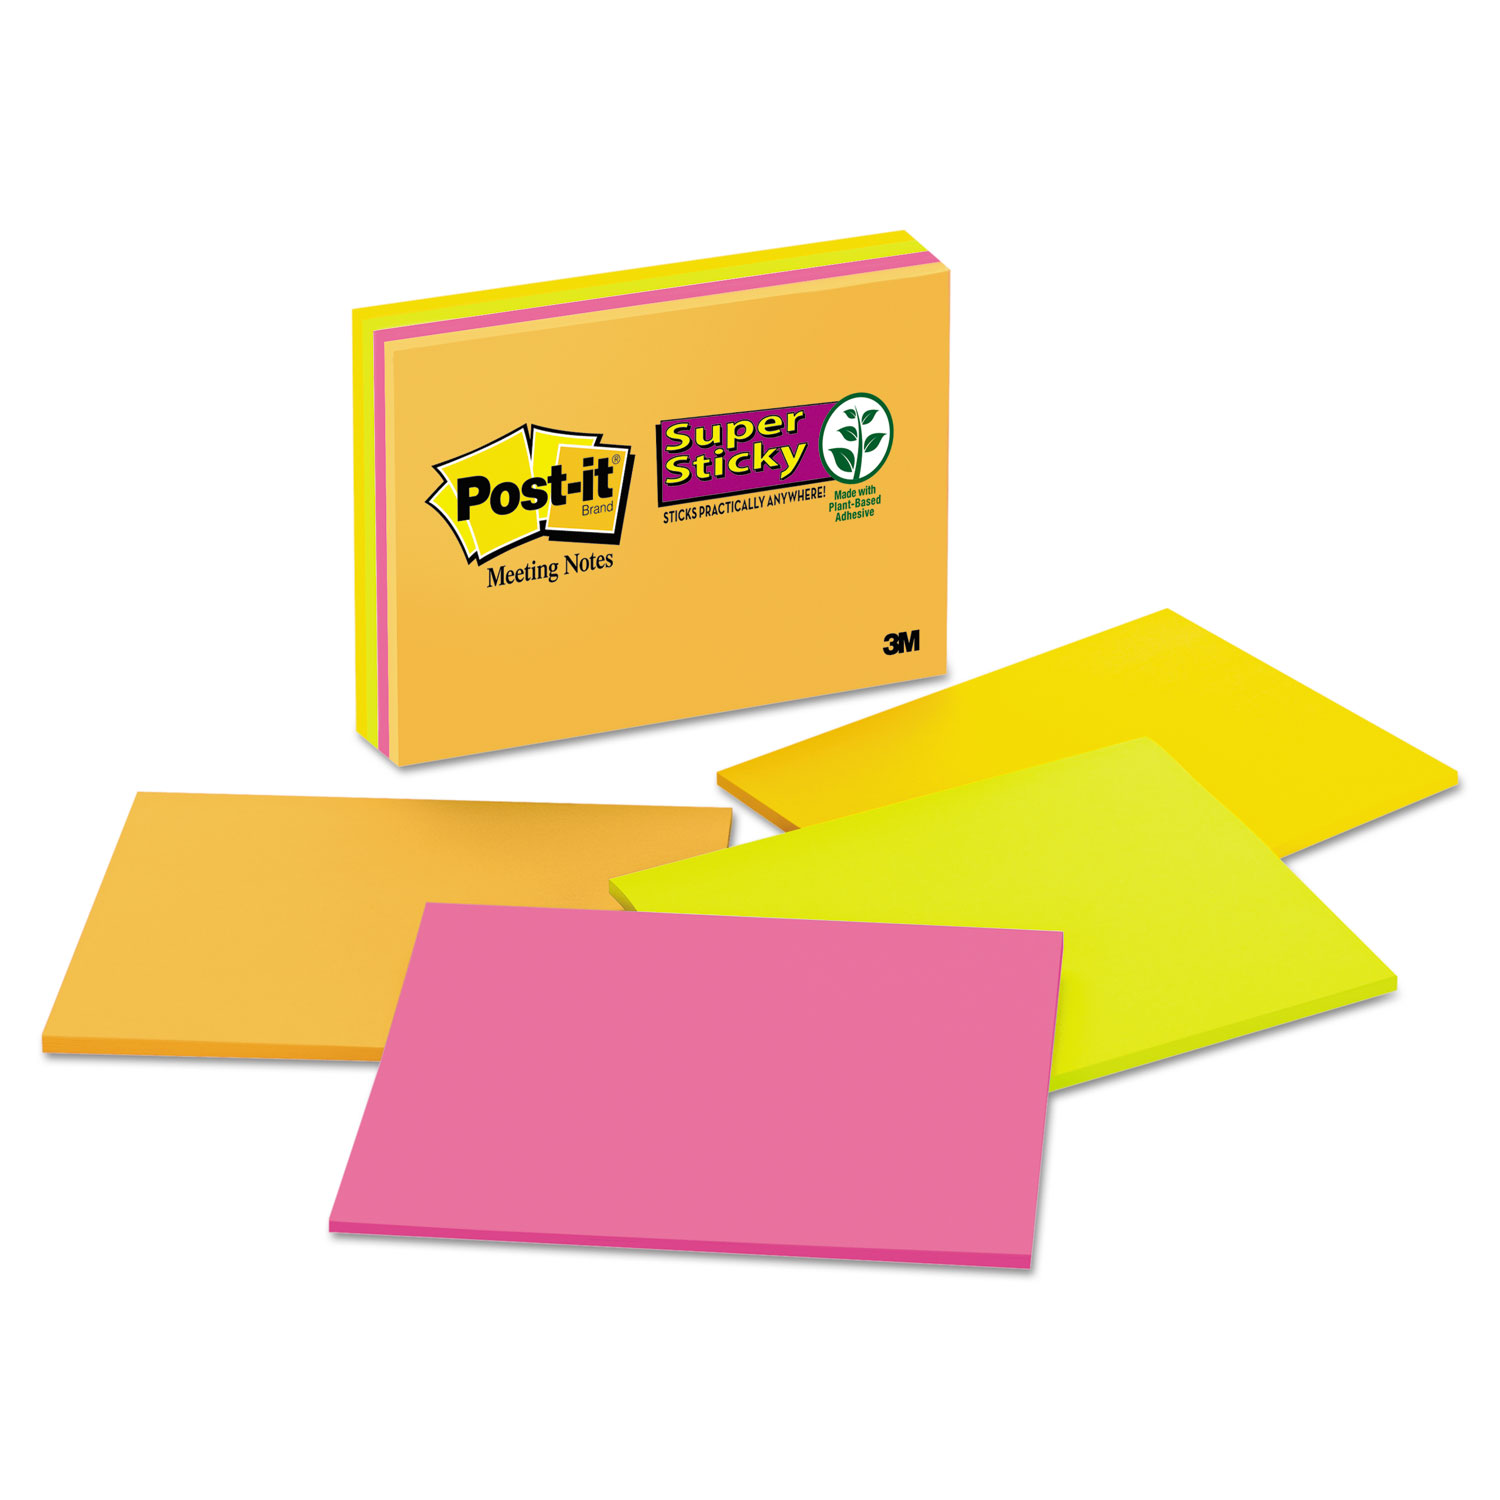 Super Sticky Meeting Notes in Rio de Janeiro Colors, 8 x 6, 45-Sheet, 4/Pack